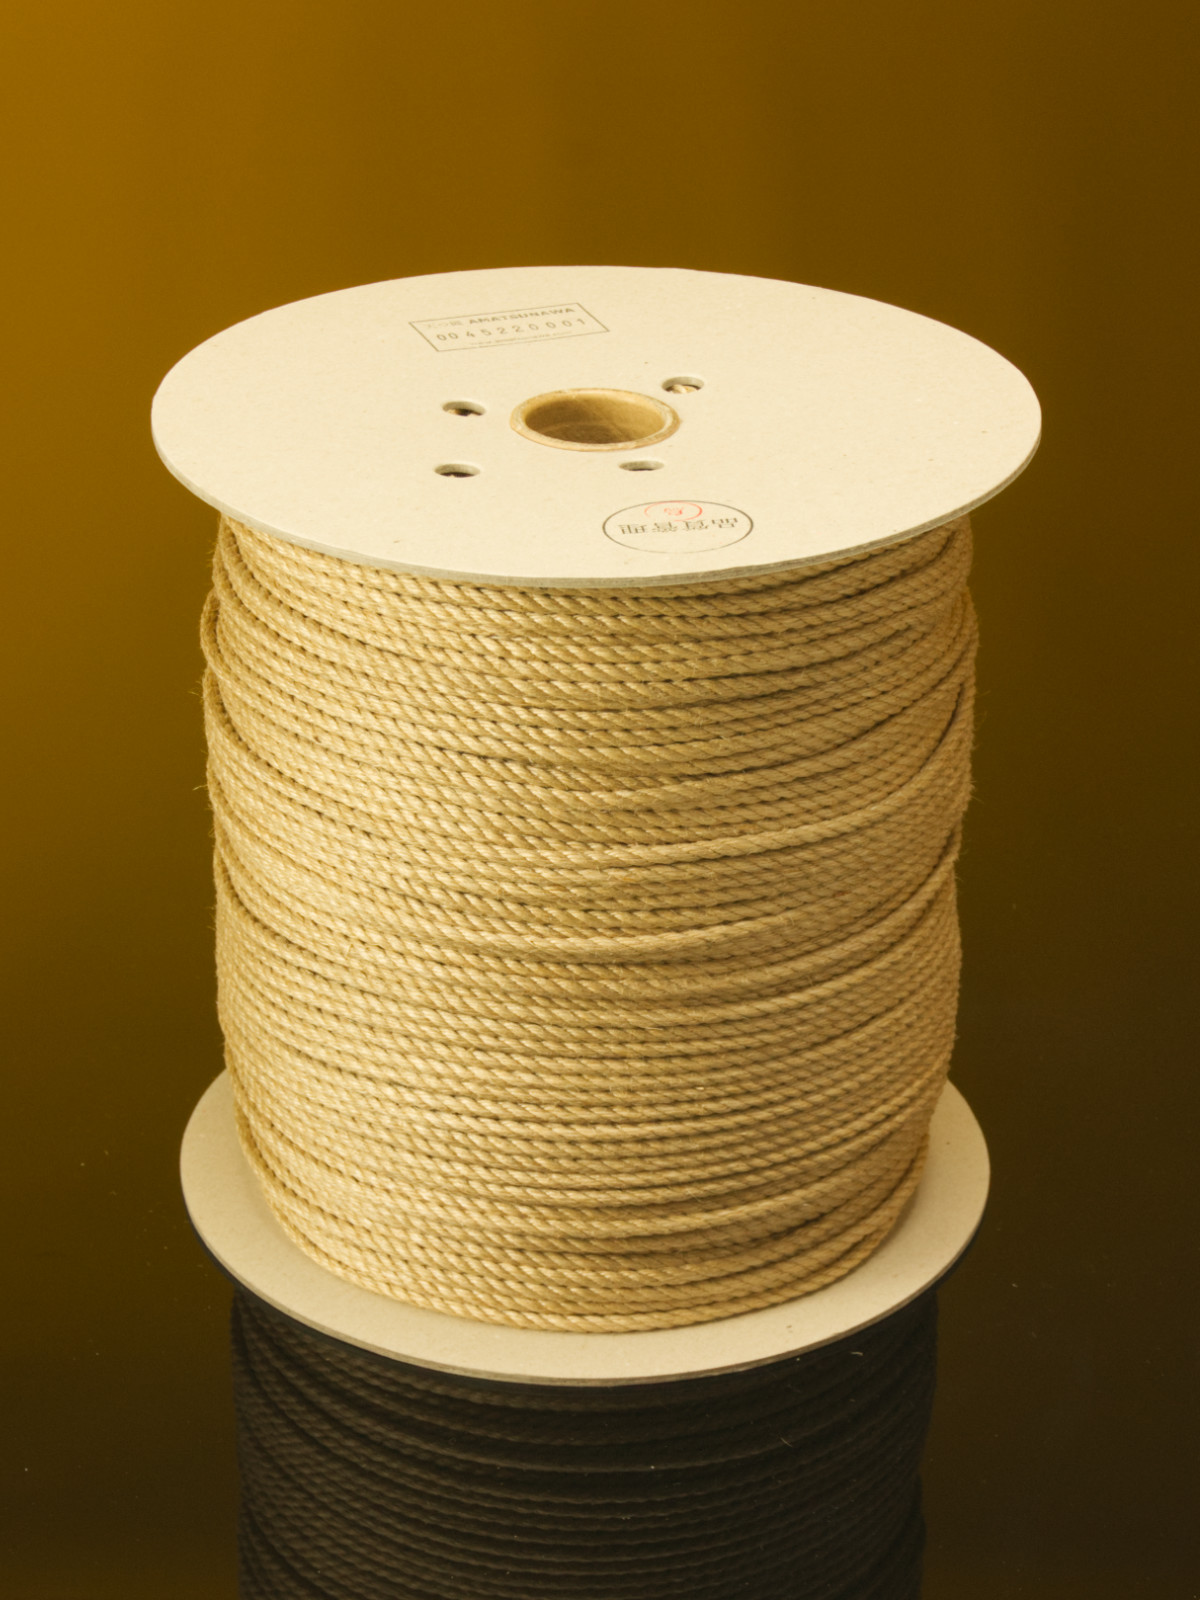 ∅ 4.5mm JOUYOKU MAXI-ROLL, ~6kg, 400m, ready-for-use Japanese-made jute rope, JBO-free